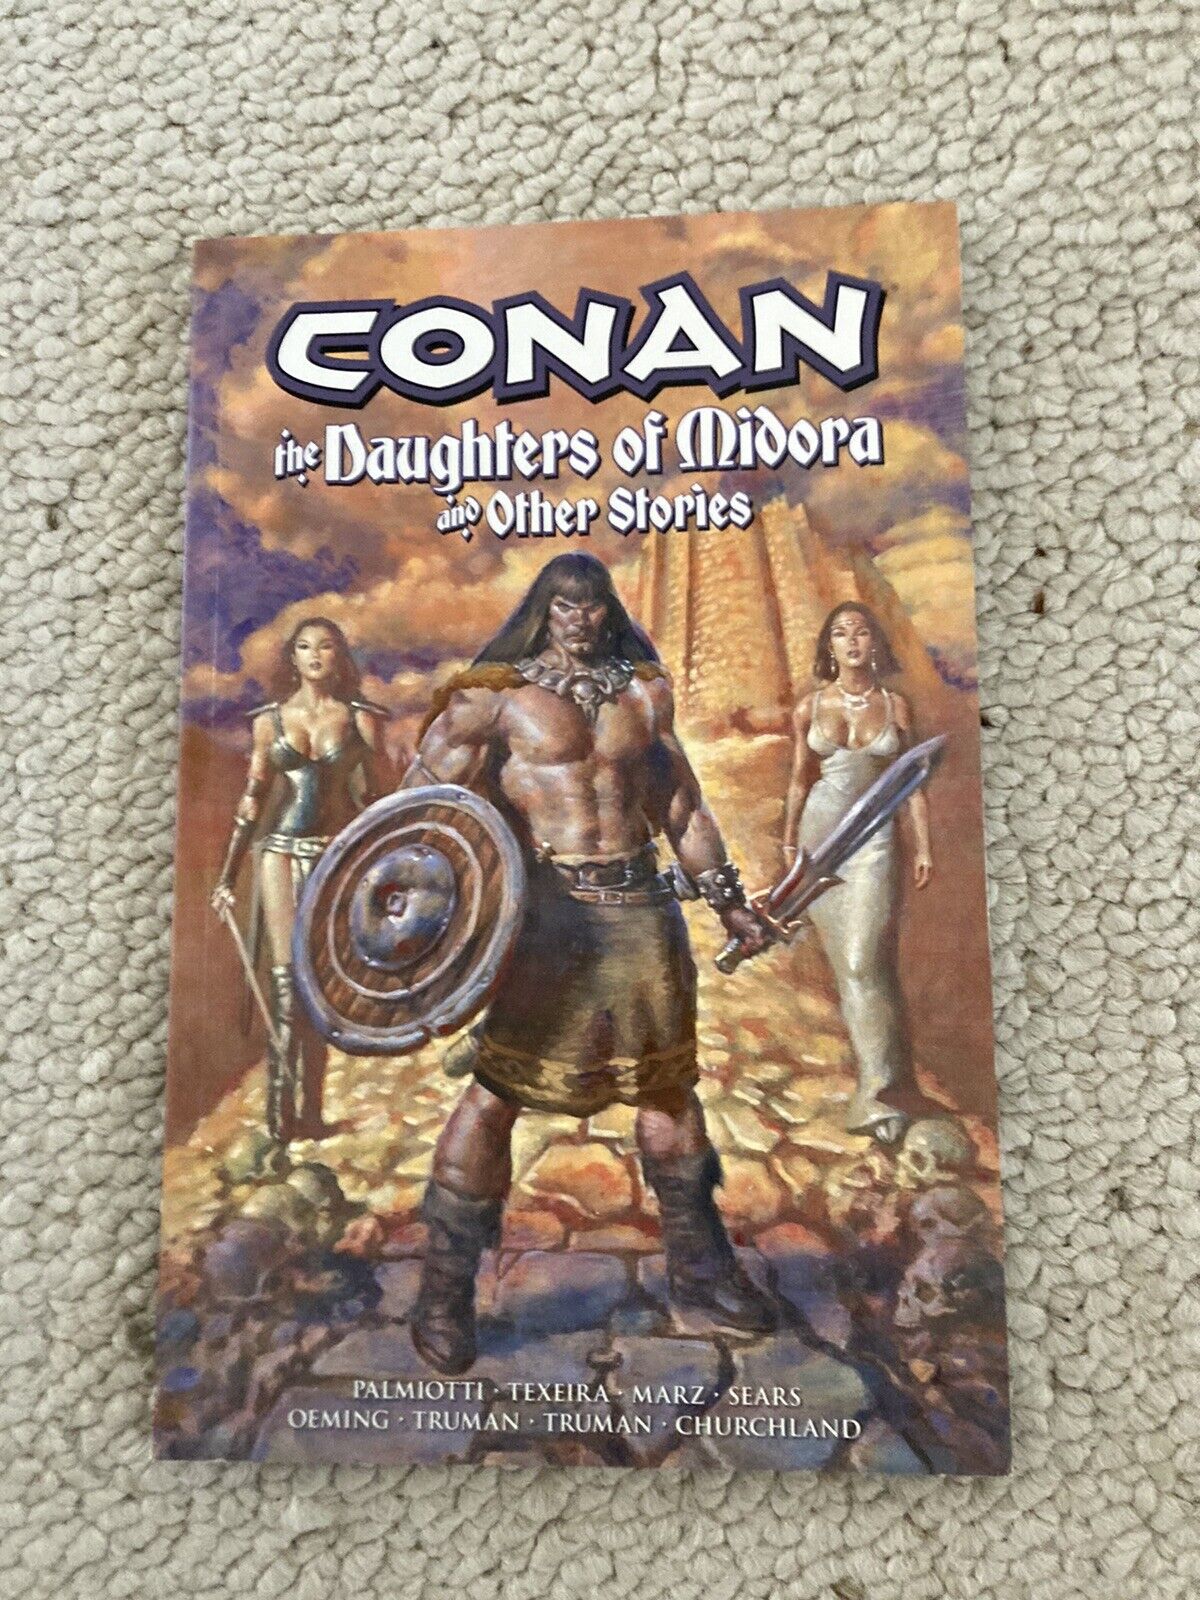 Conan: The Daughters of Midora and Other Stories by Jimmy Palmiotti New Free Shp